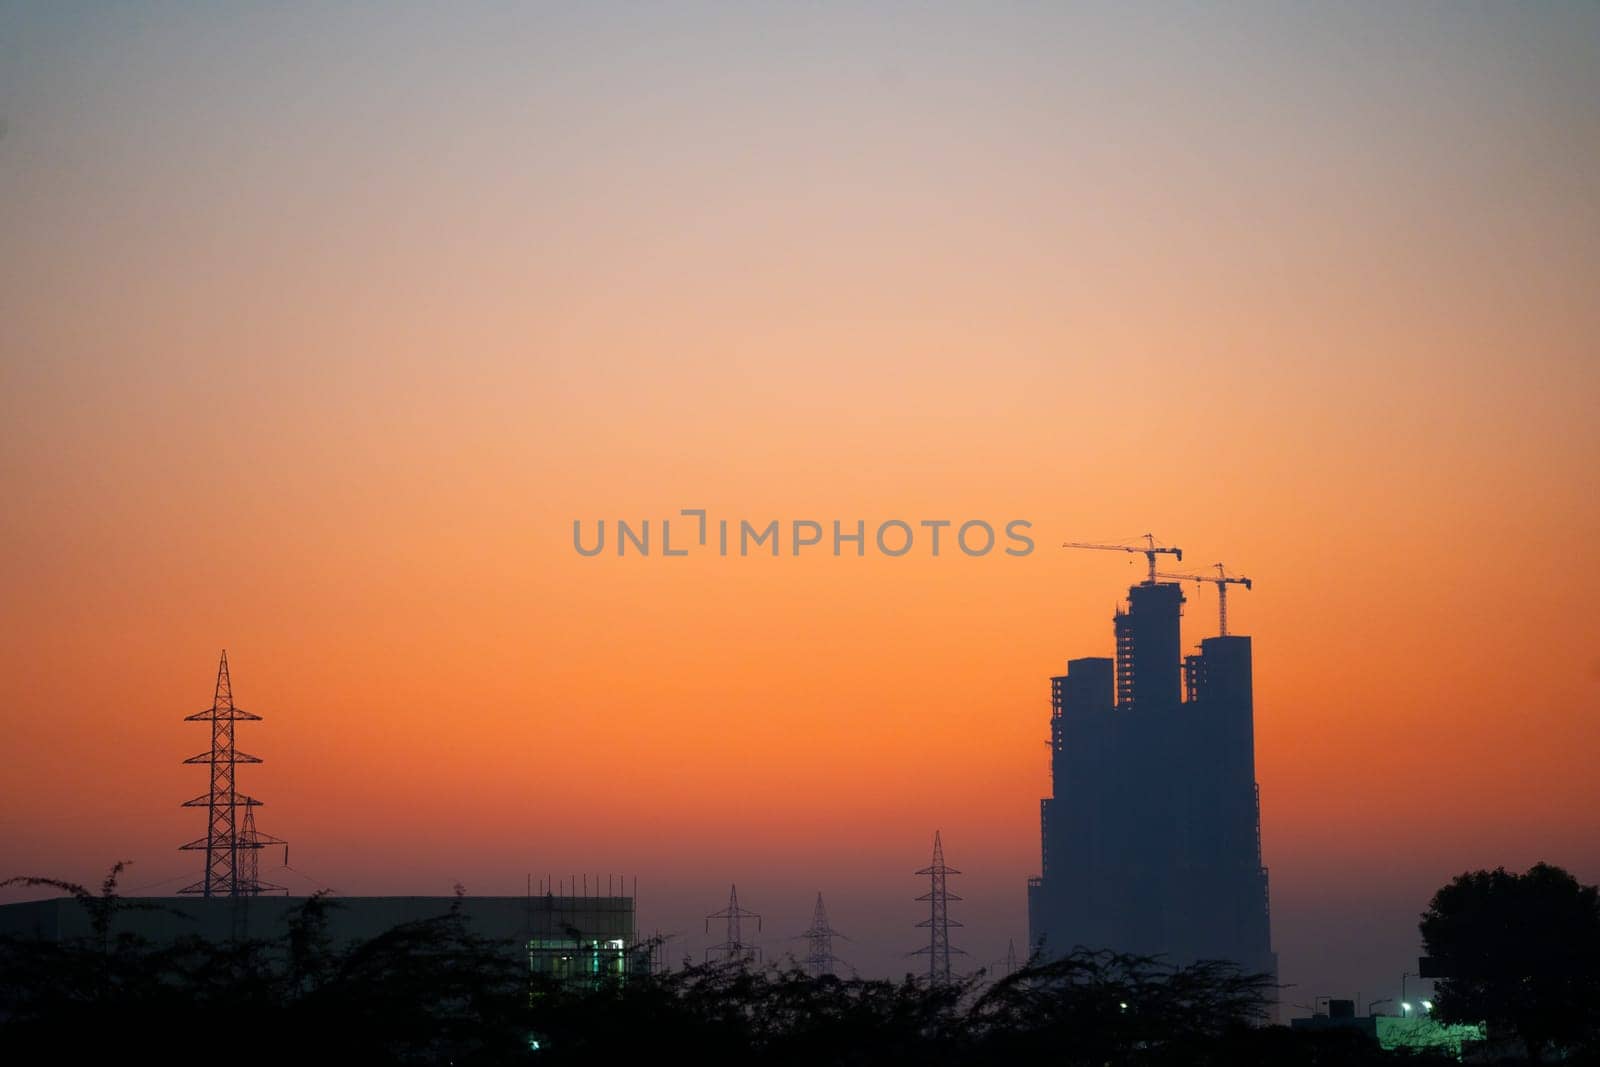 Evening dusk twilight shot showing under construction skyscraper multi story building silhouette against golden, red sky in Indian cities